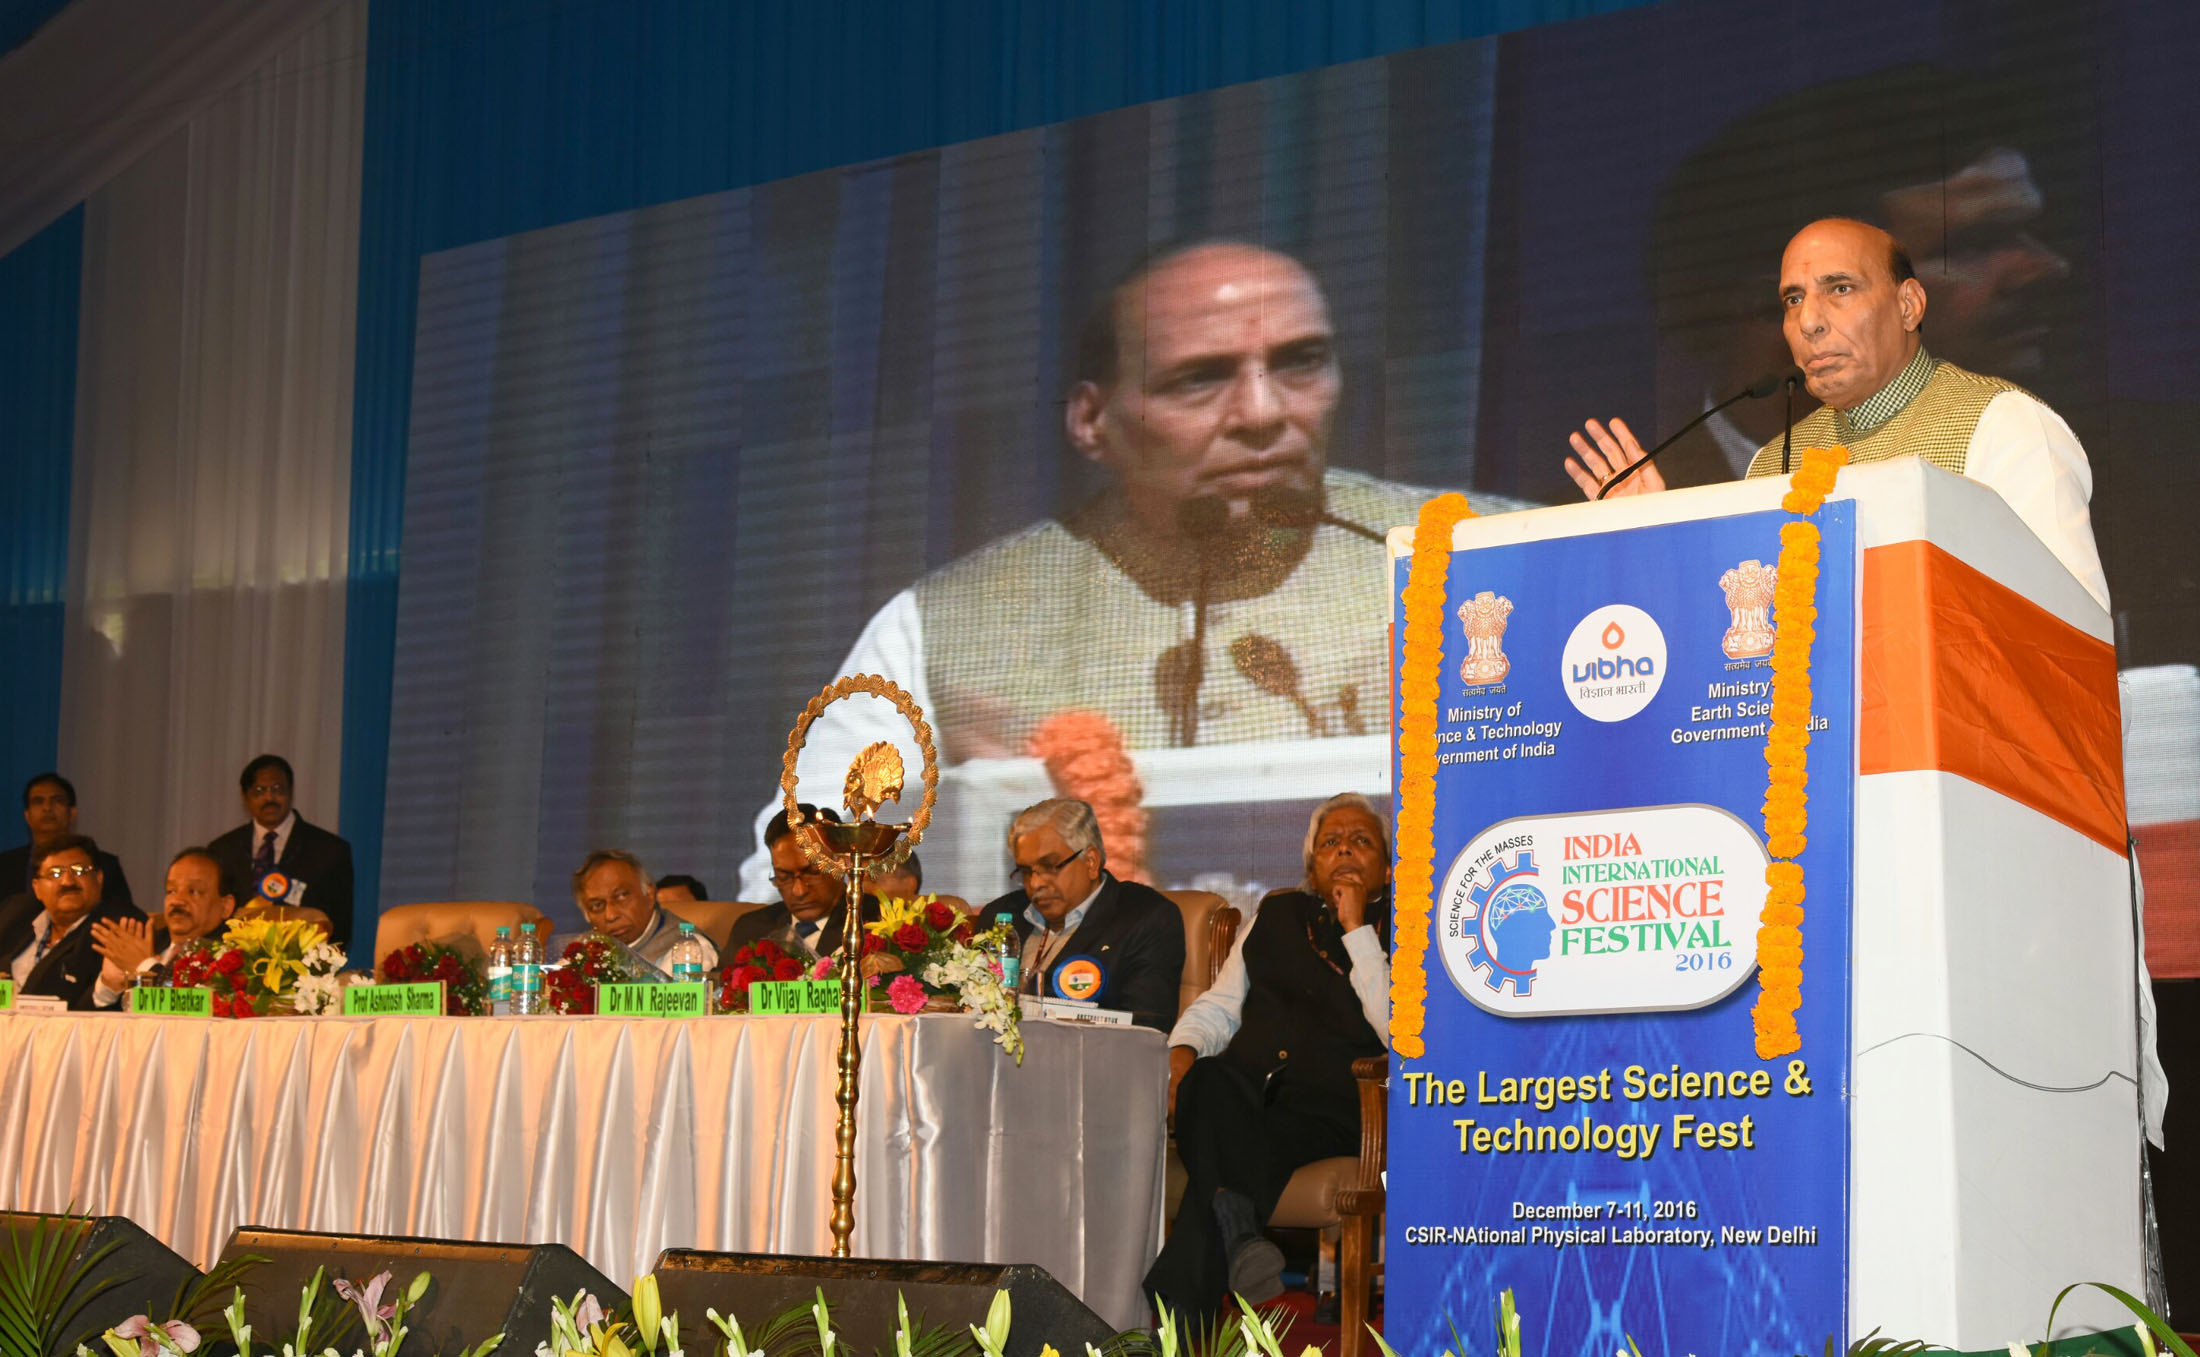 The Union Home Minister, Shri Rajnath Singh addressing at the inauguration of the India International Science Festival 2016 (IISF-2016), organised by CSIR-NPL, in New Delhi on December 08, 2016.